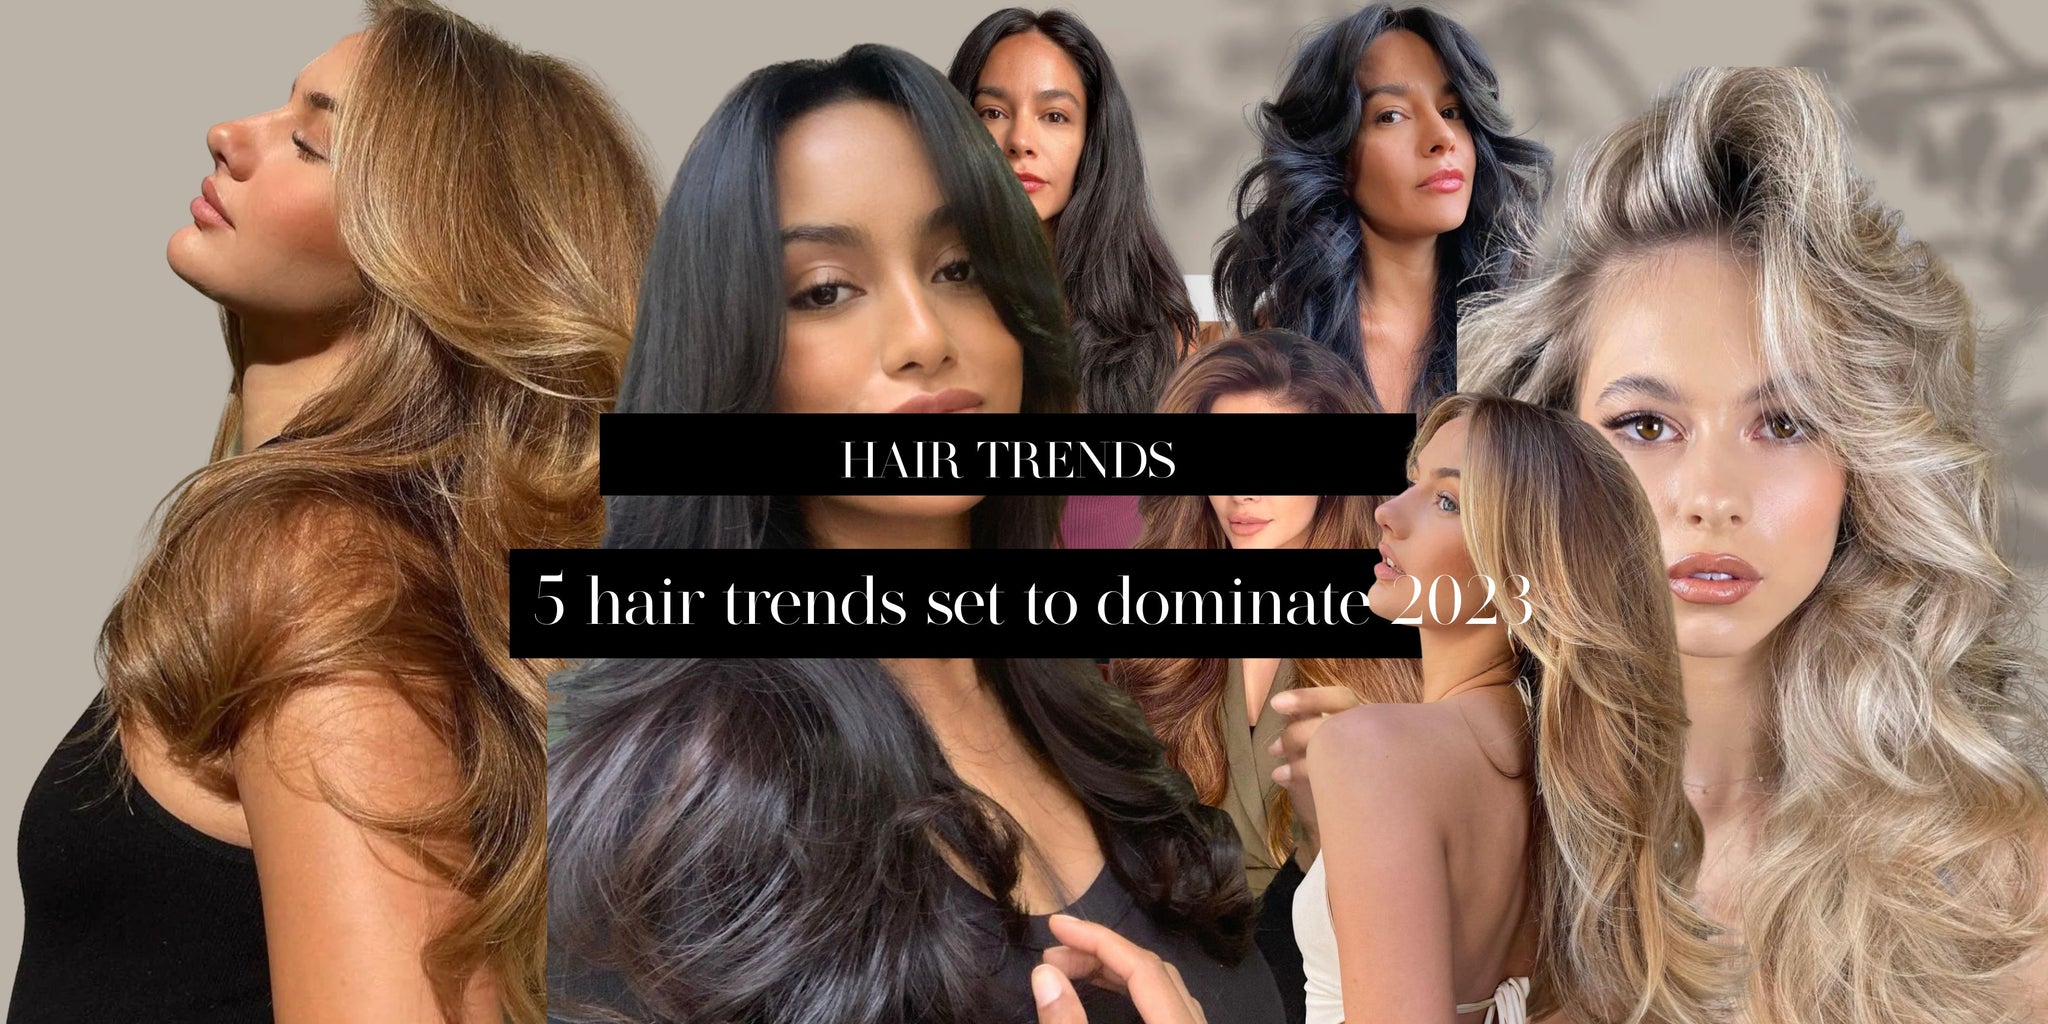 HAIR TRENDS 5 hair trends set to dominate 2023 that you should really know about